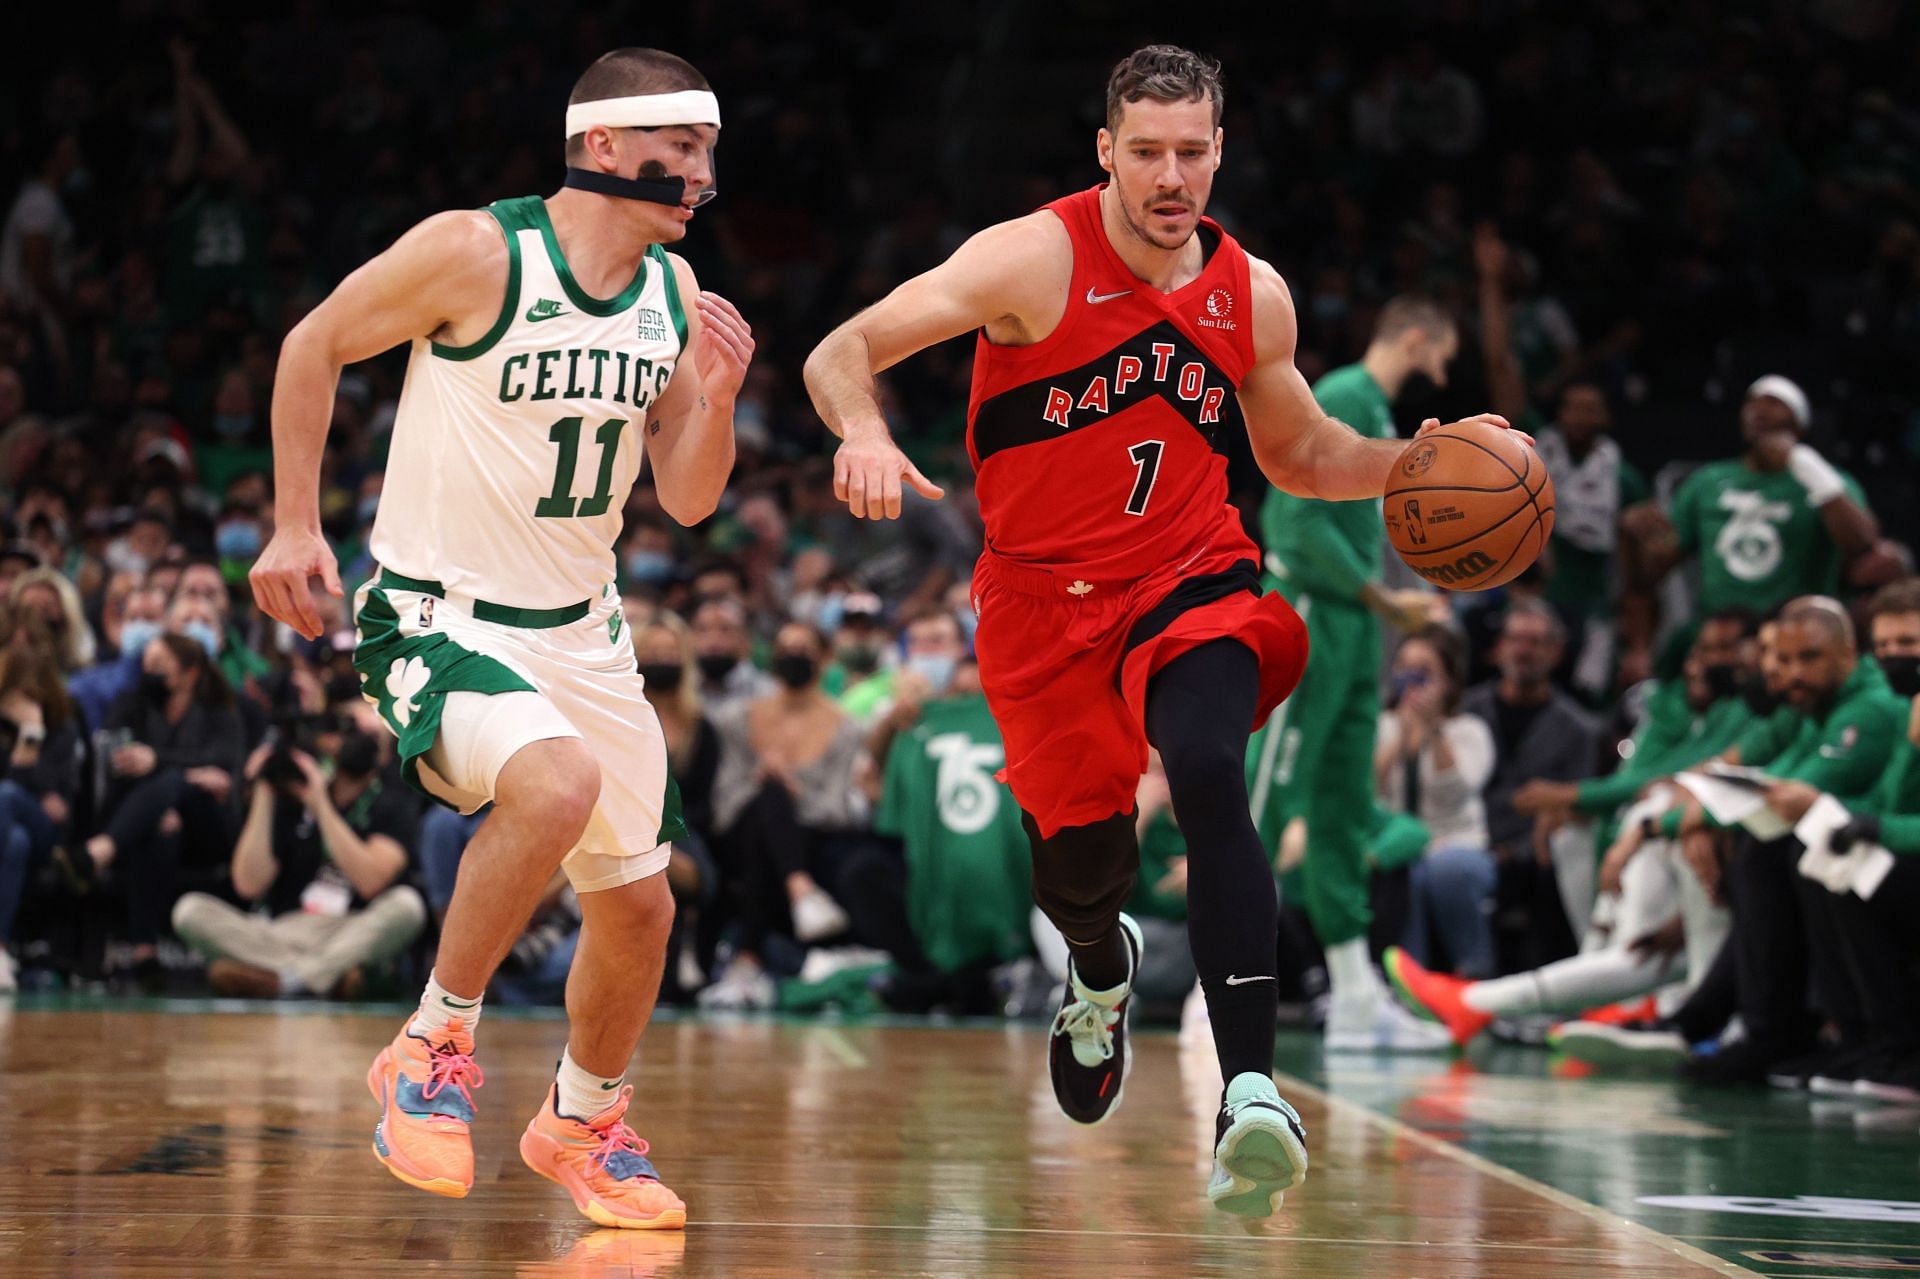 NBA Rumors: Goran Dragic to Sign with Nets After Contract Buyout